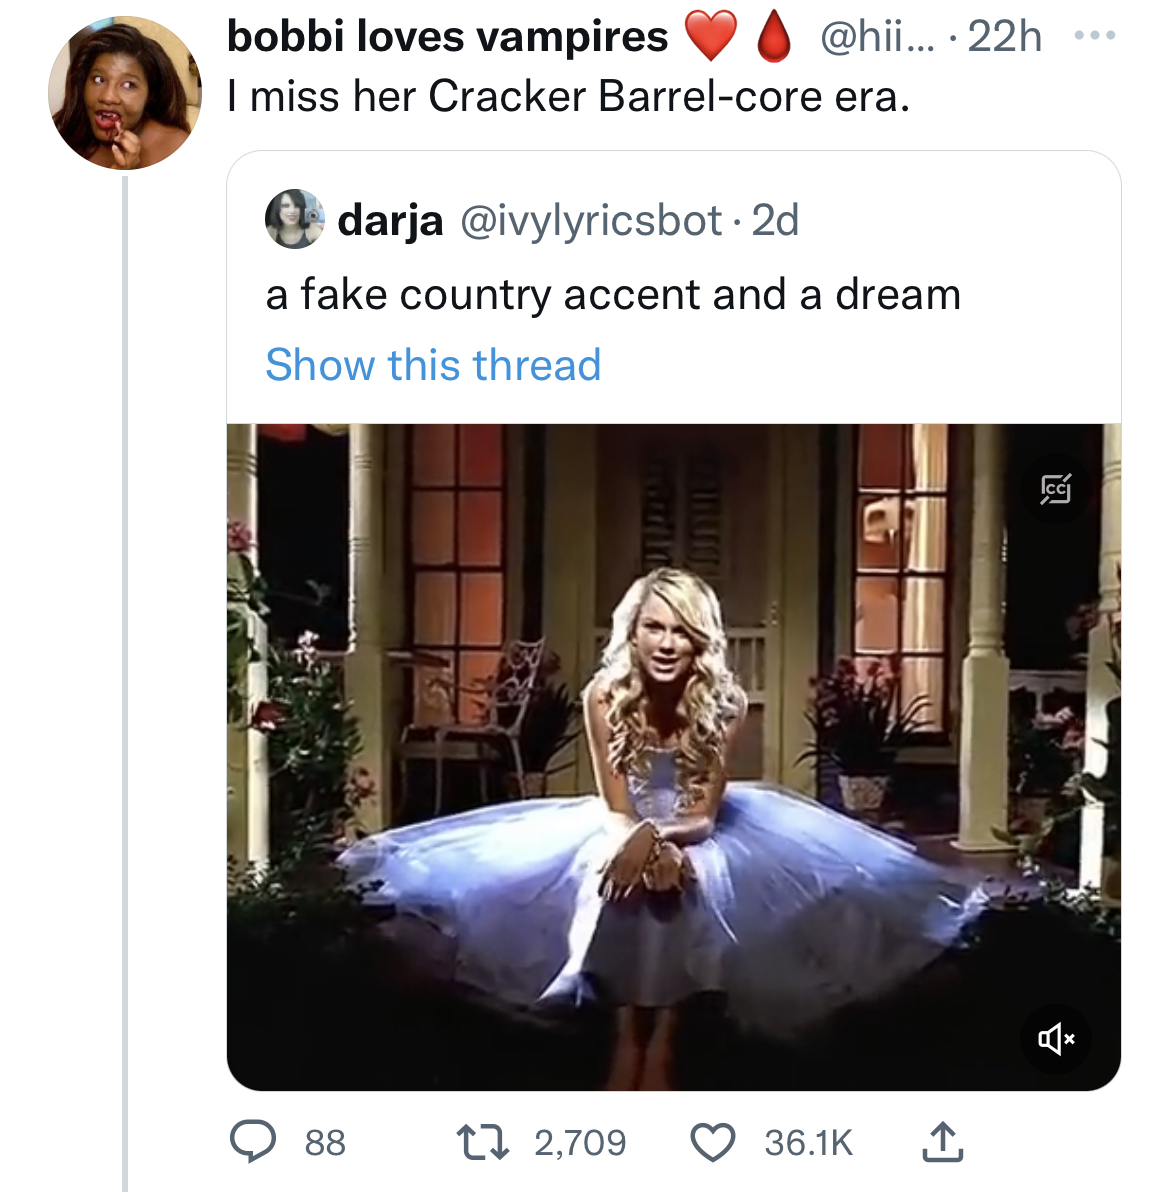 Tweets roasting celebrities - taylor swift our song dress - bobbi loves vampires I miss her Cracker Barrelcore era. darja . 2d a fake country accent and a dream Show this thread O 8888 ... 22h 2,709 Con Ledan